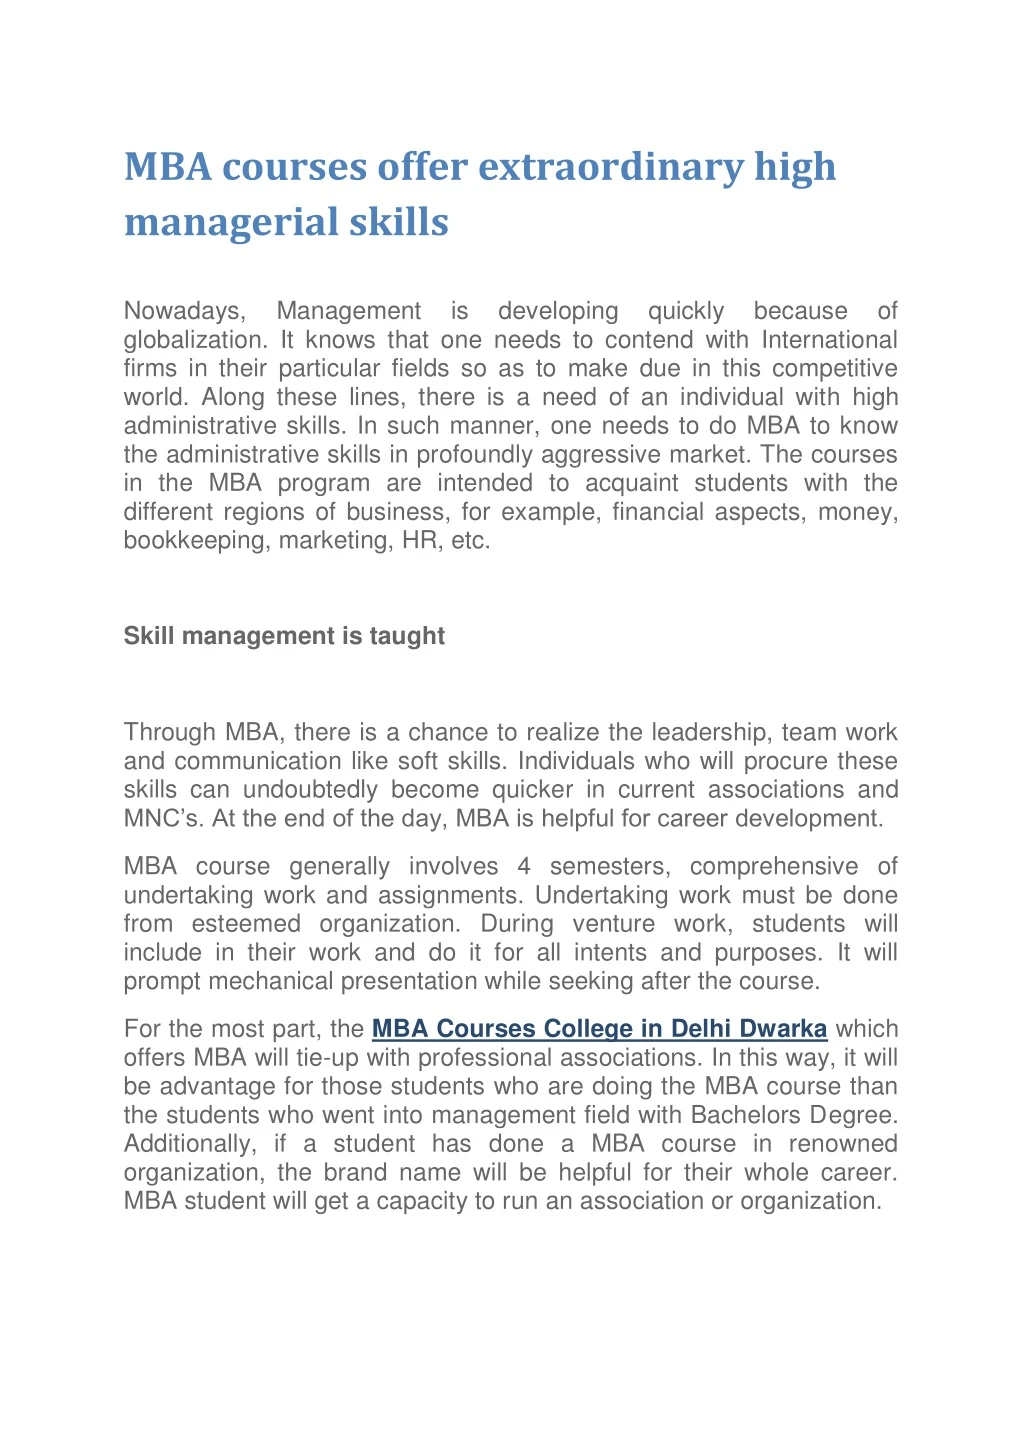 mba courses offer extraordinary high managerial